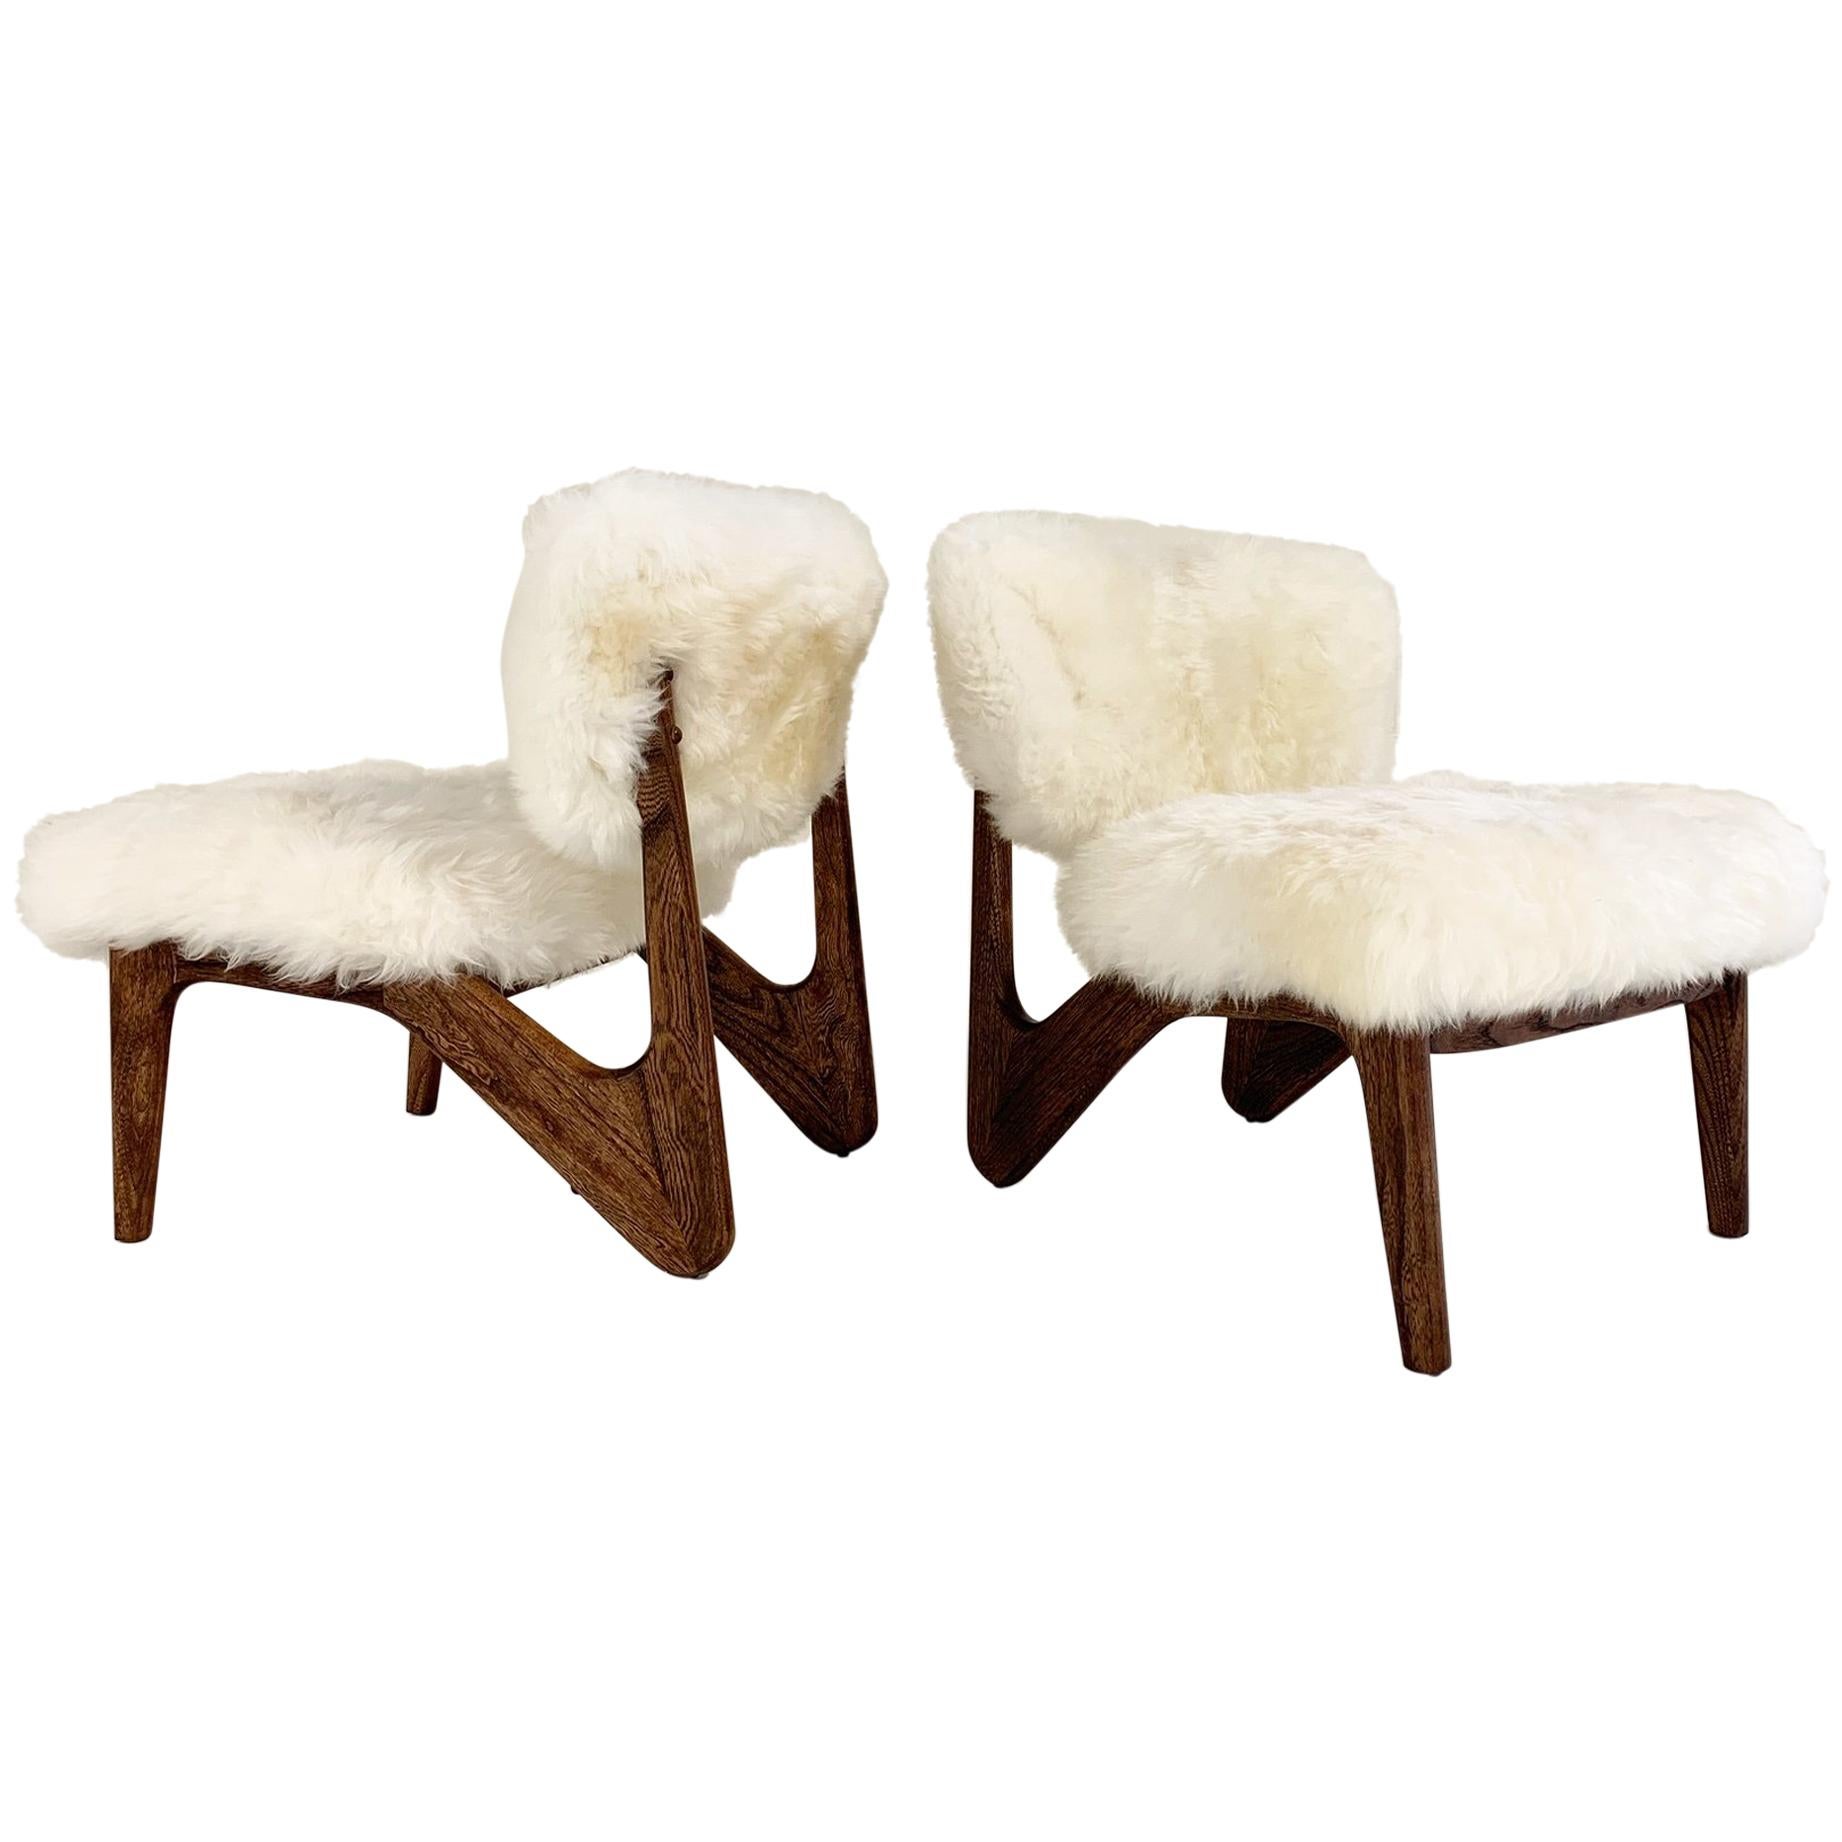 Adrian Pearsall Style Sculptural Chairs Restored in Brazilian Sheepskin, Pair